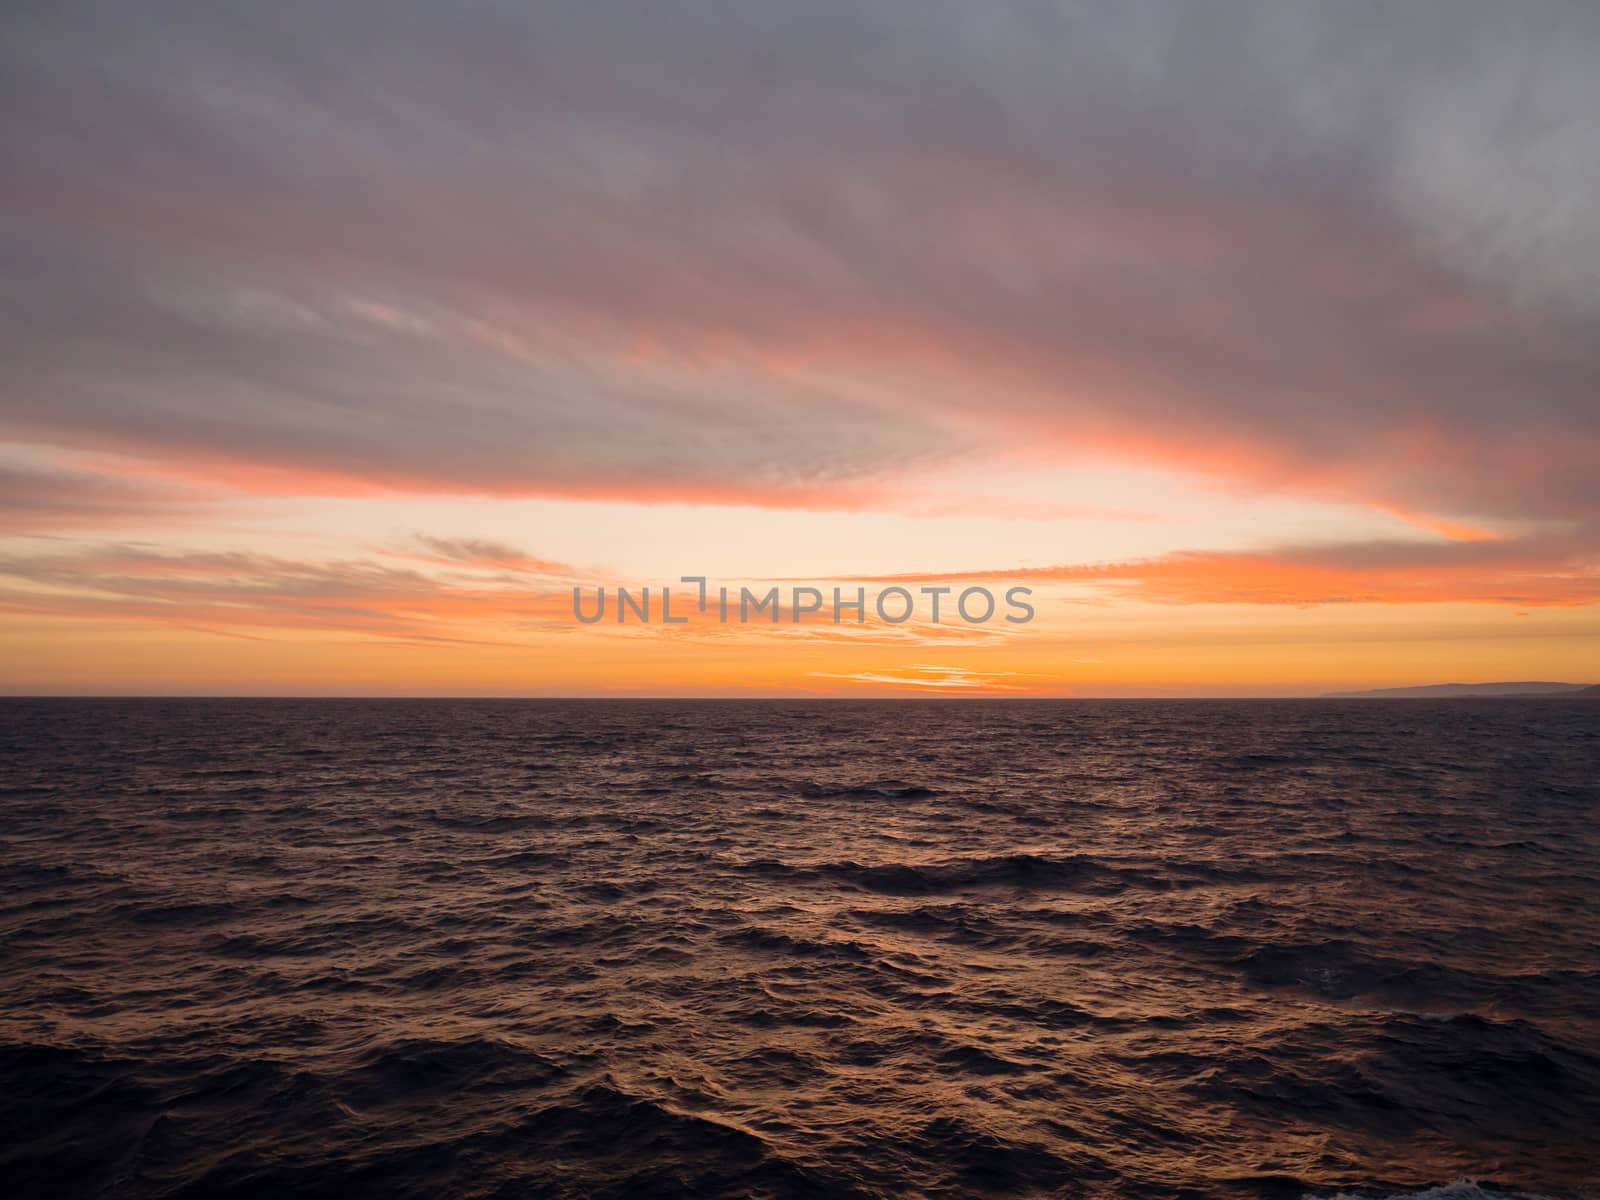 Sunset at the sea with deep orange colors in the afternoon and sky with clouds, view from a ship